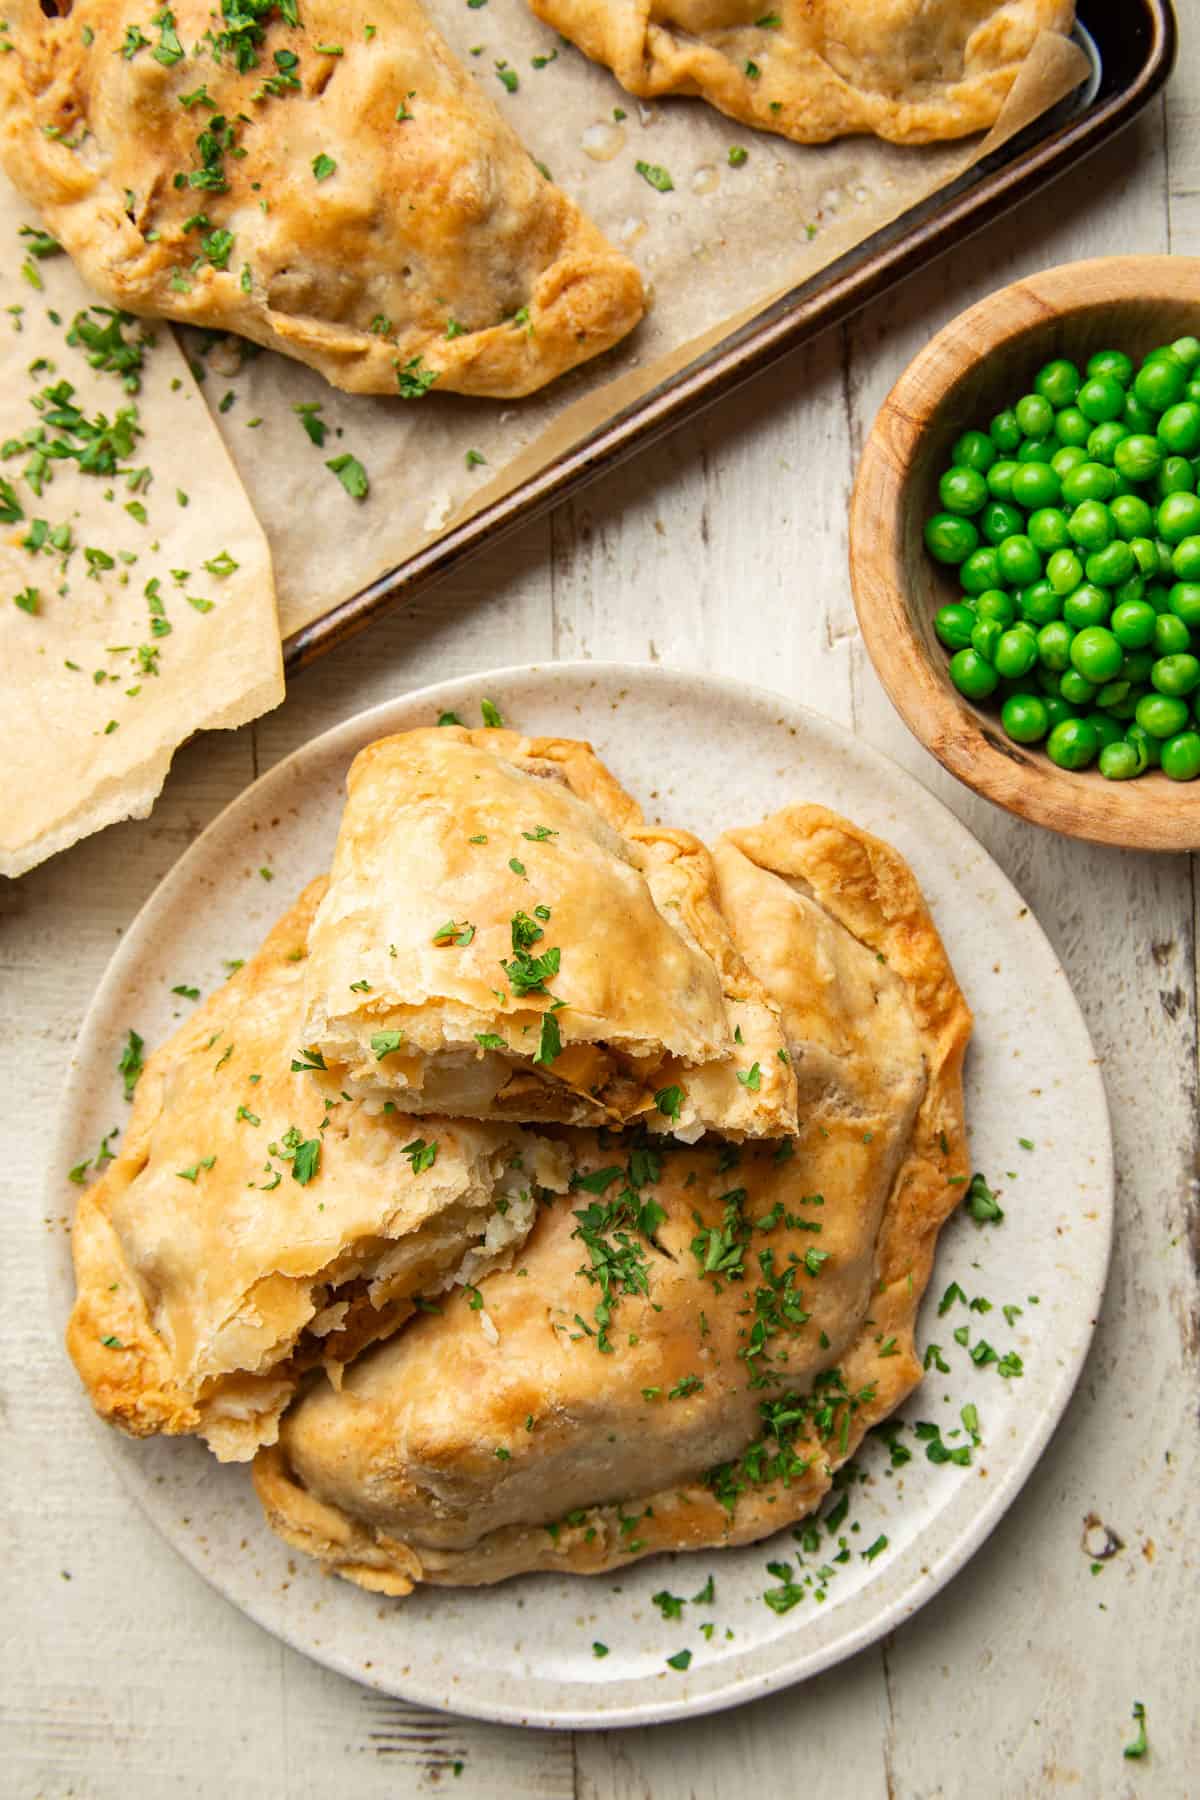 White wooden surface set with baking sheet, bowl of peas and plate of Vegan Cornish Pasties.